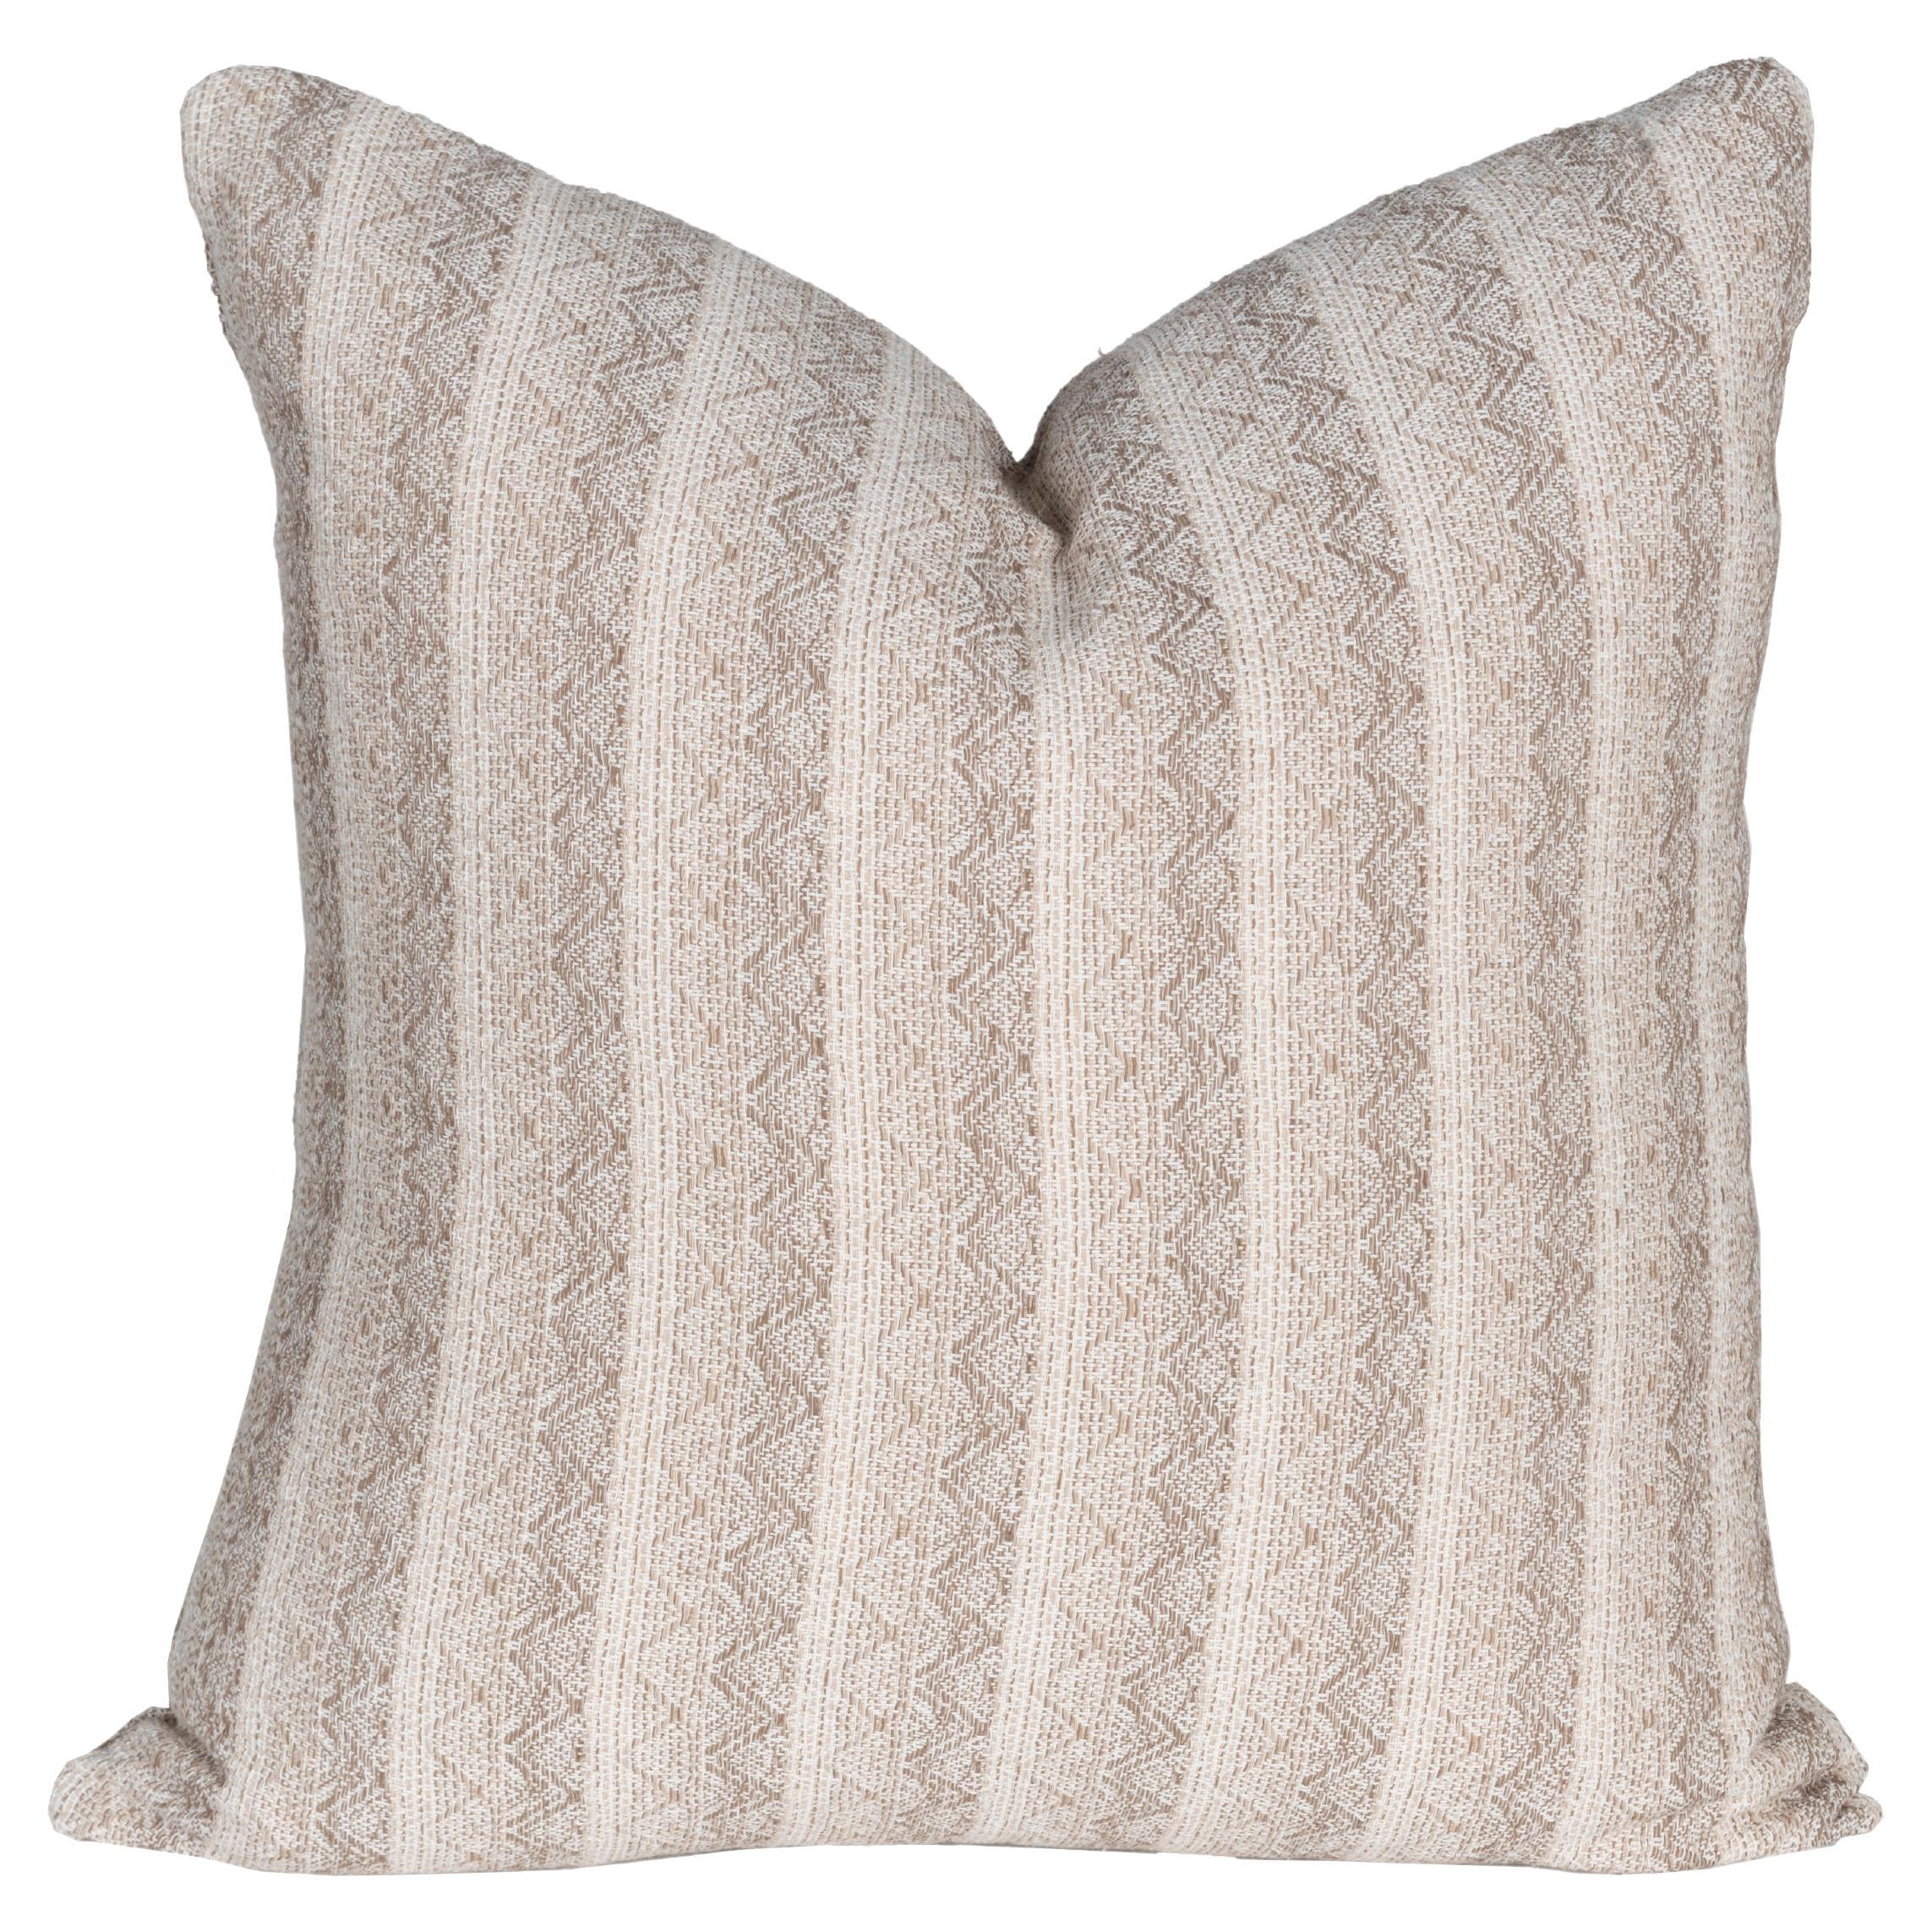 White & Gray Vintage Hmong Striped Pillow For Sale